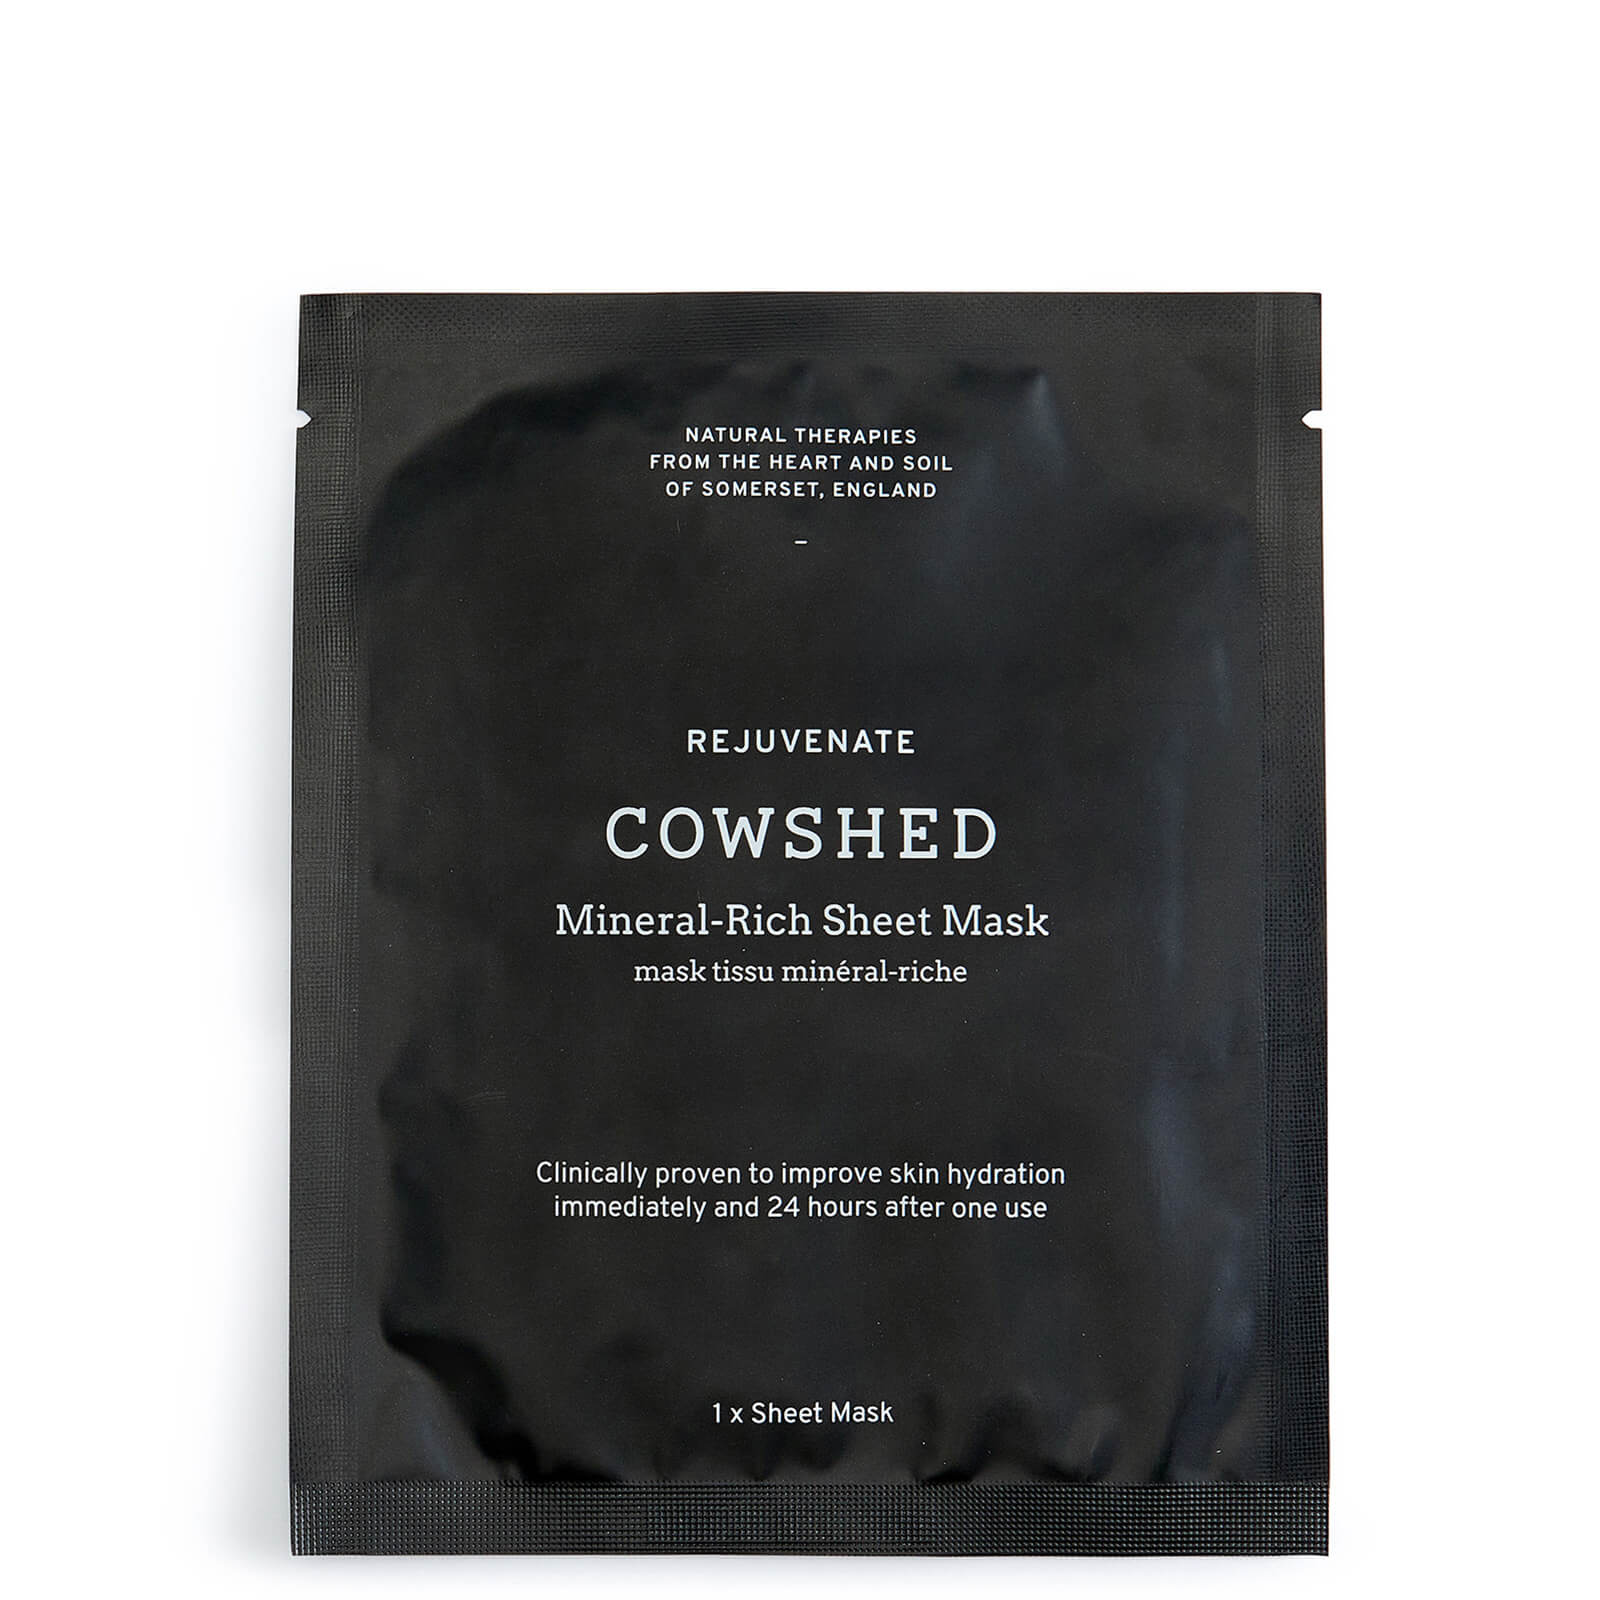 Image of Cowshed Mineral-Rich Sheet Mask 1g